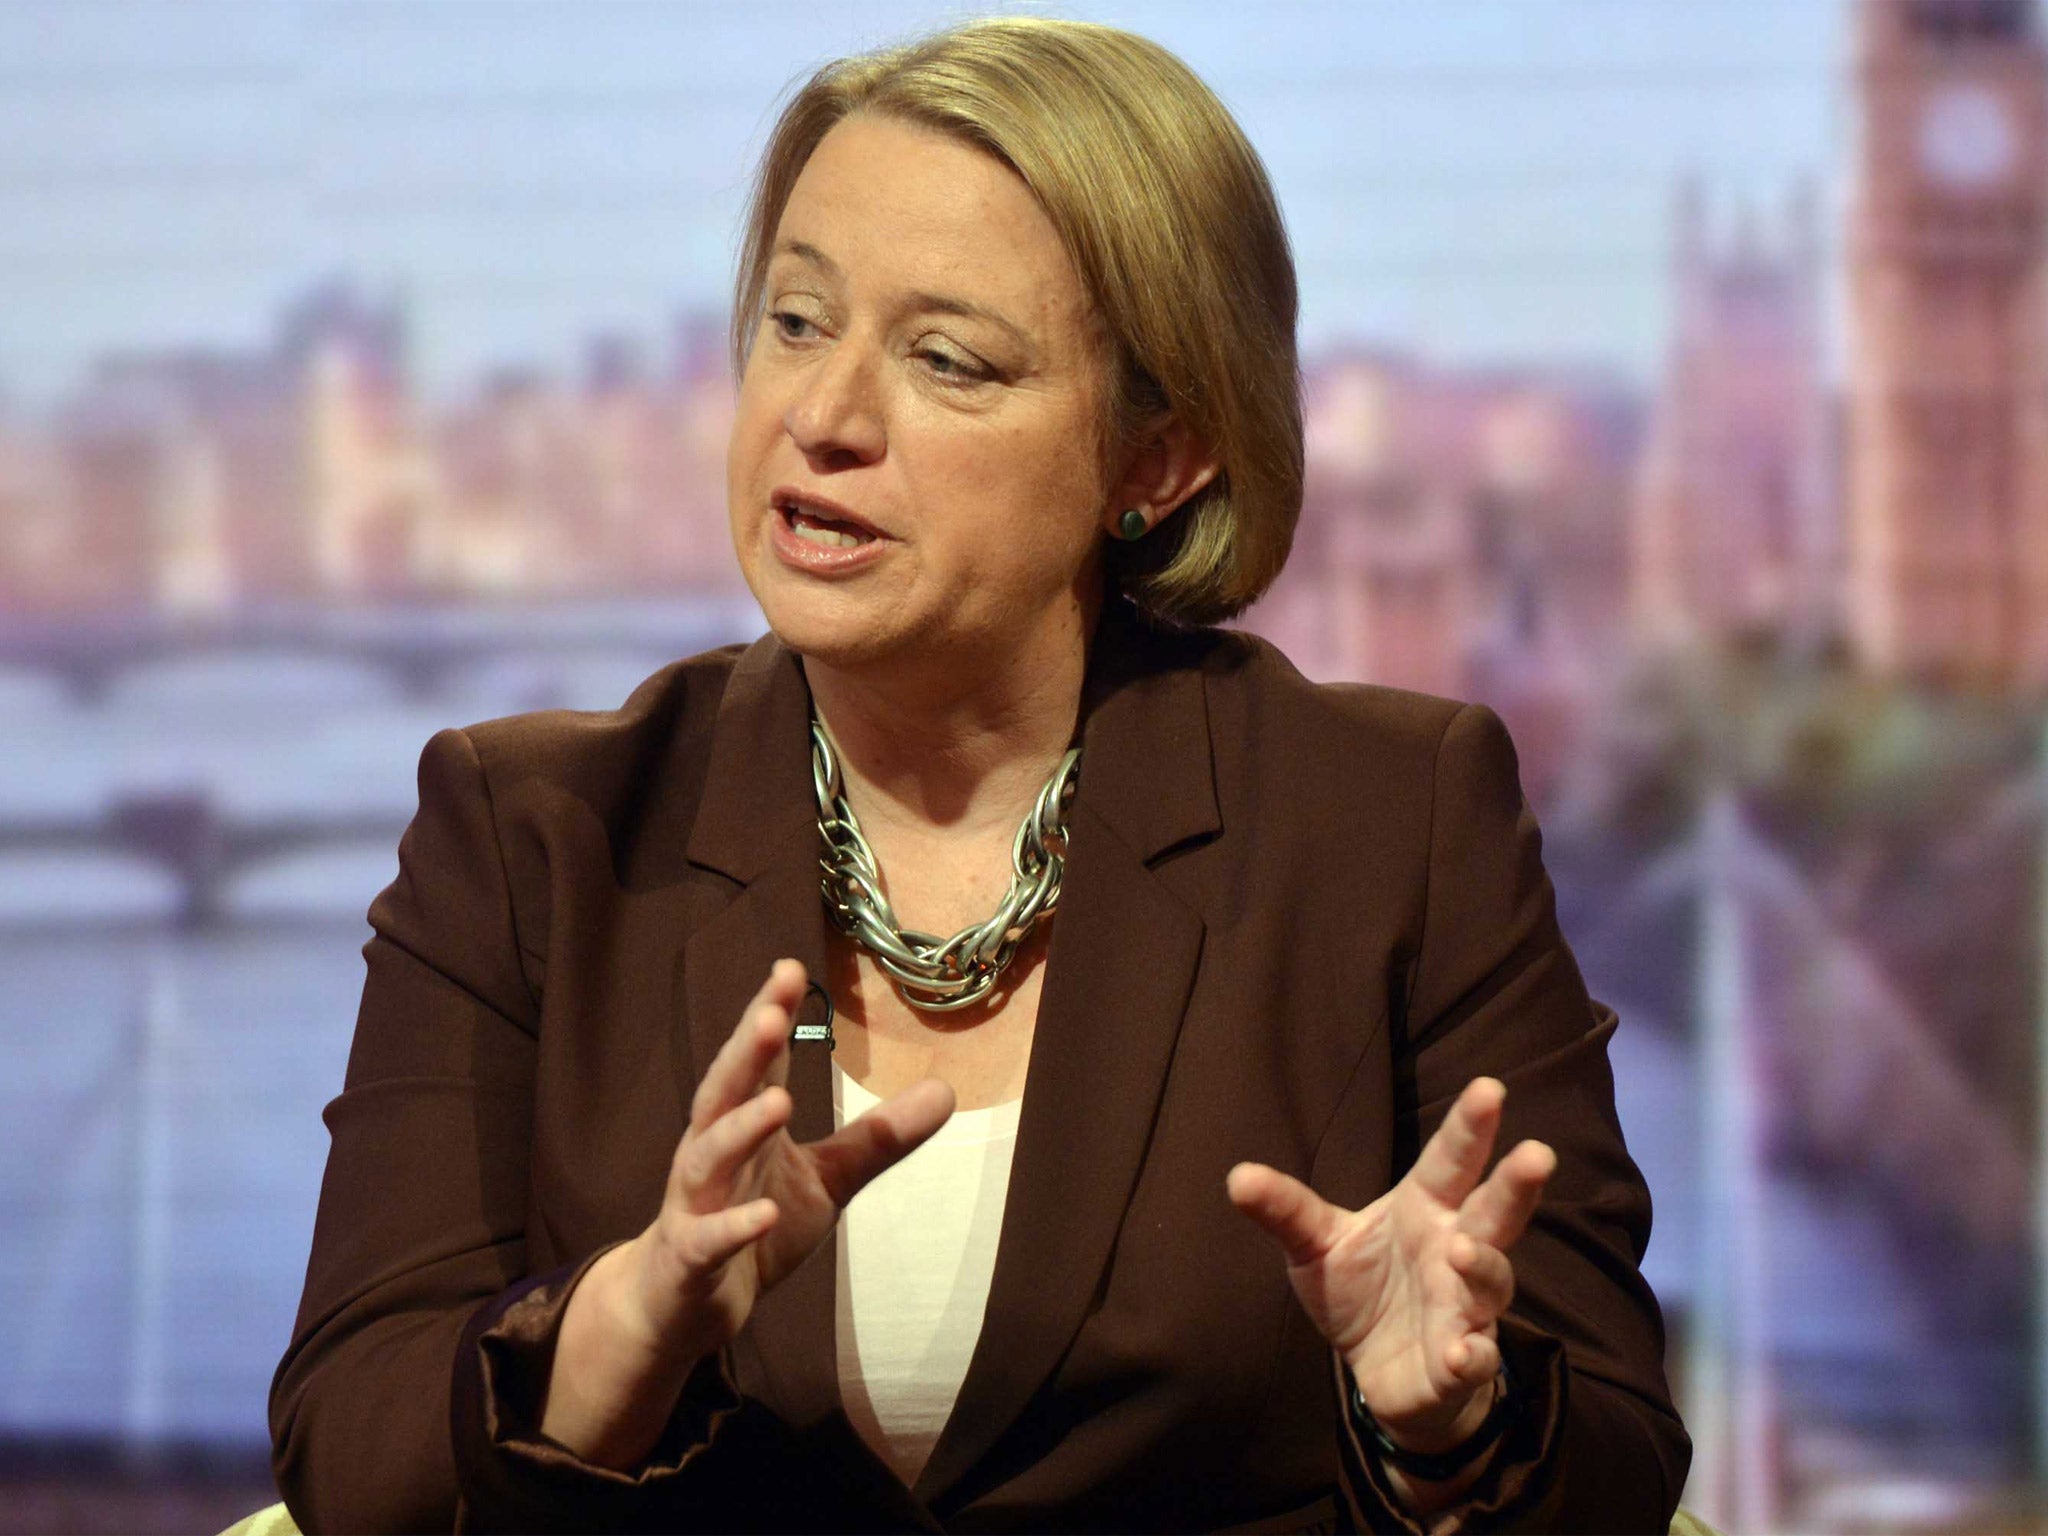 Natalie Bennett leader of the Green Party of England and Wales